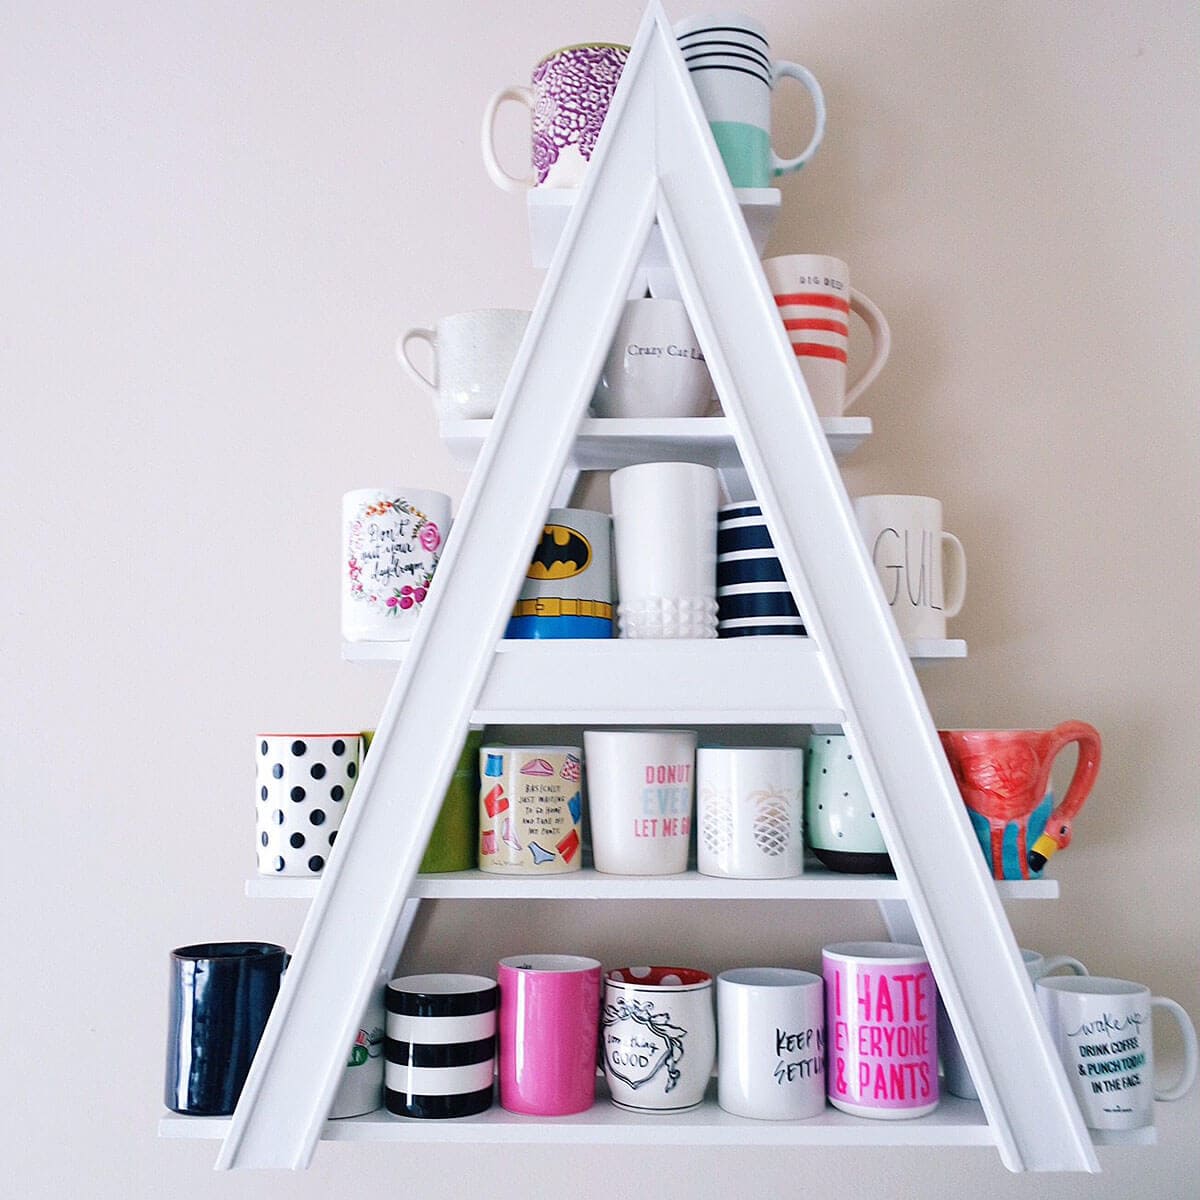 22 coffee cup holder ideas to declutter your kitchen - 67